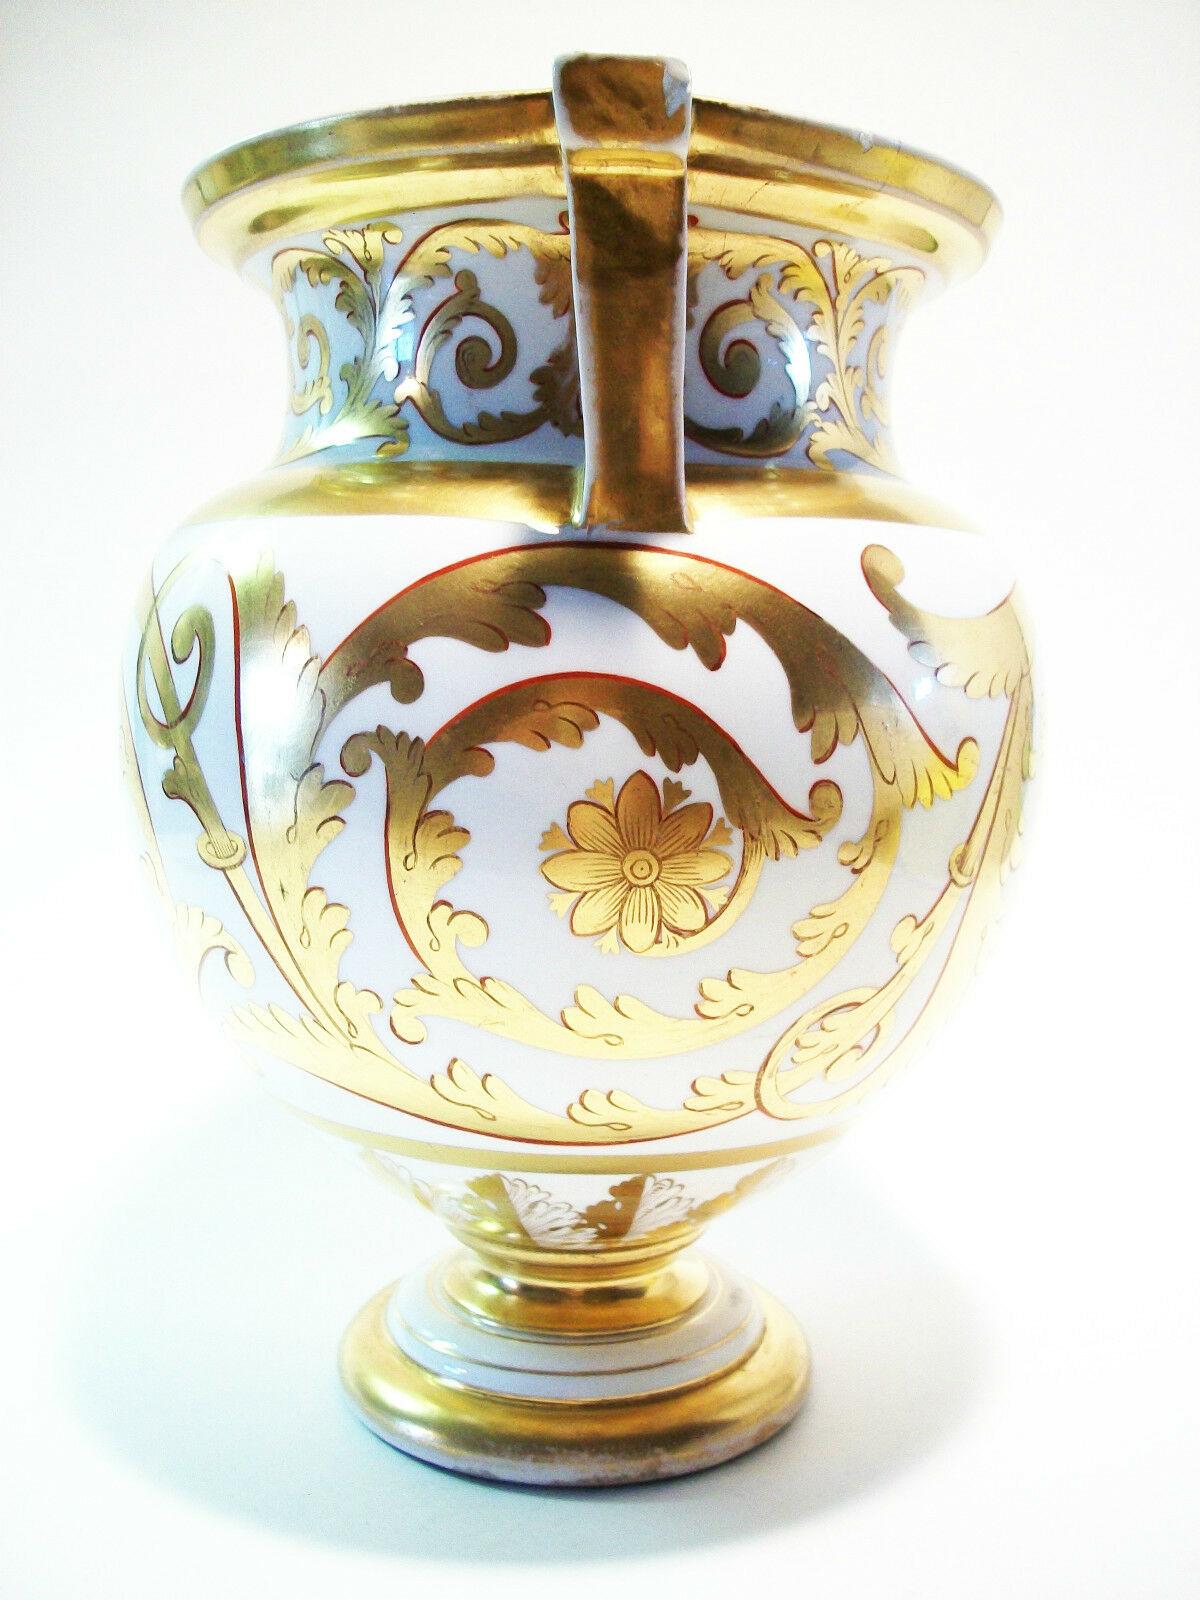 Spode, Rare Antique Gilt Porcelain Low Scent Jar, Pattern No. 671, circa 1805 In Good Condition For Sale In Chatham, ON